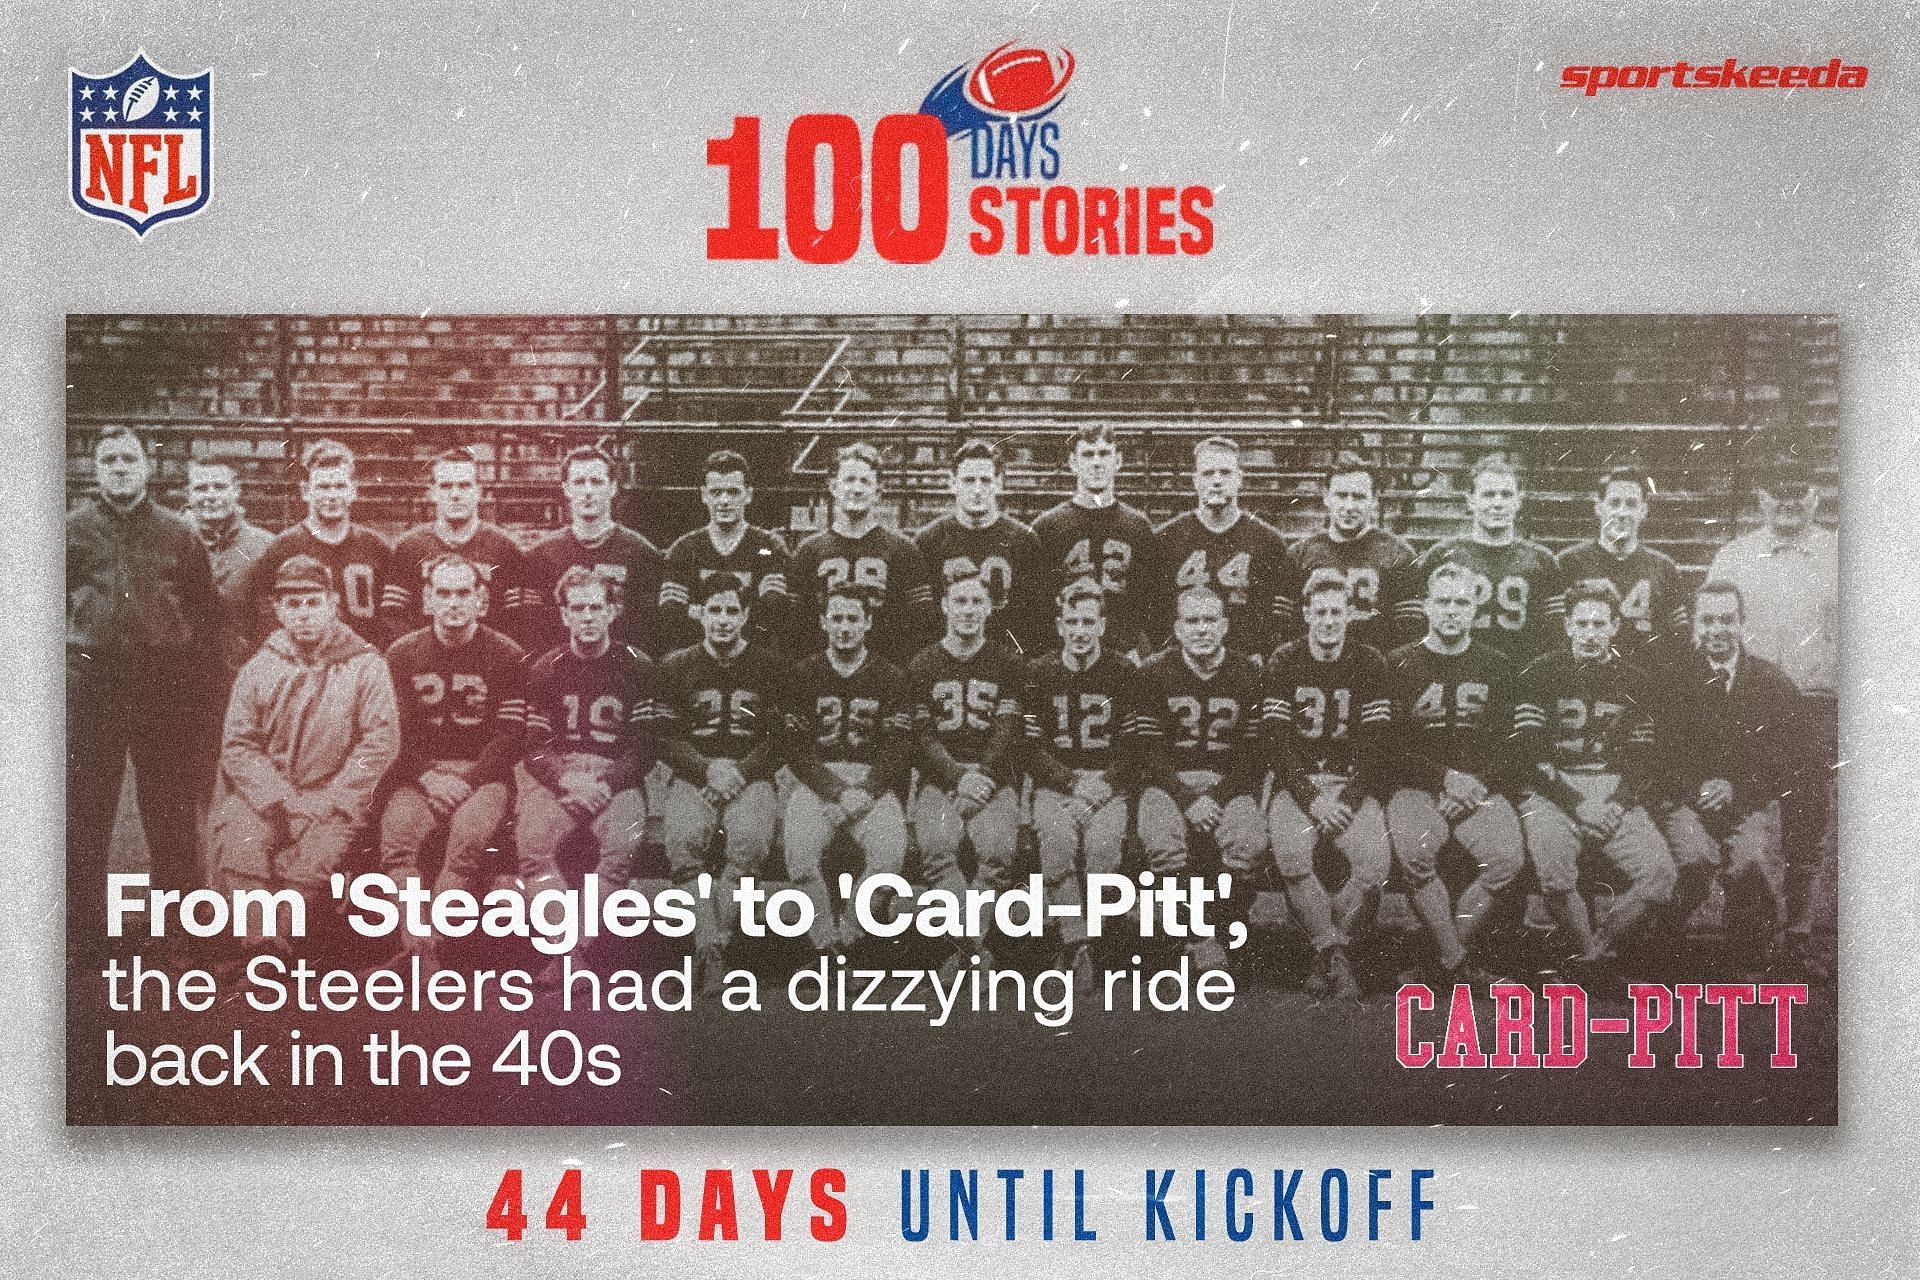 From &#039;Steagles&#039; to &#039;Card-Pitt&#039; the Steelers had a dizzying ride back in the 40s